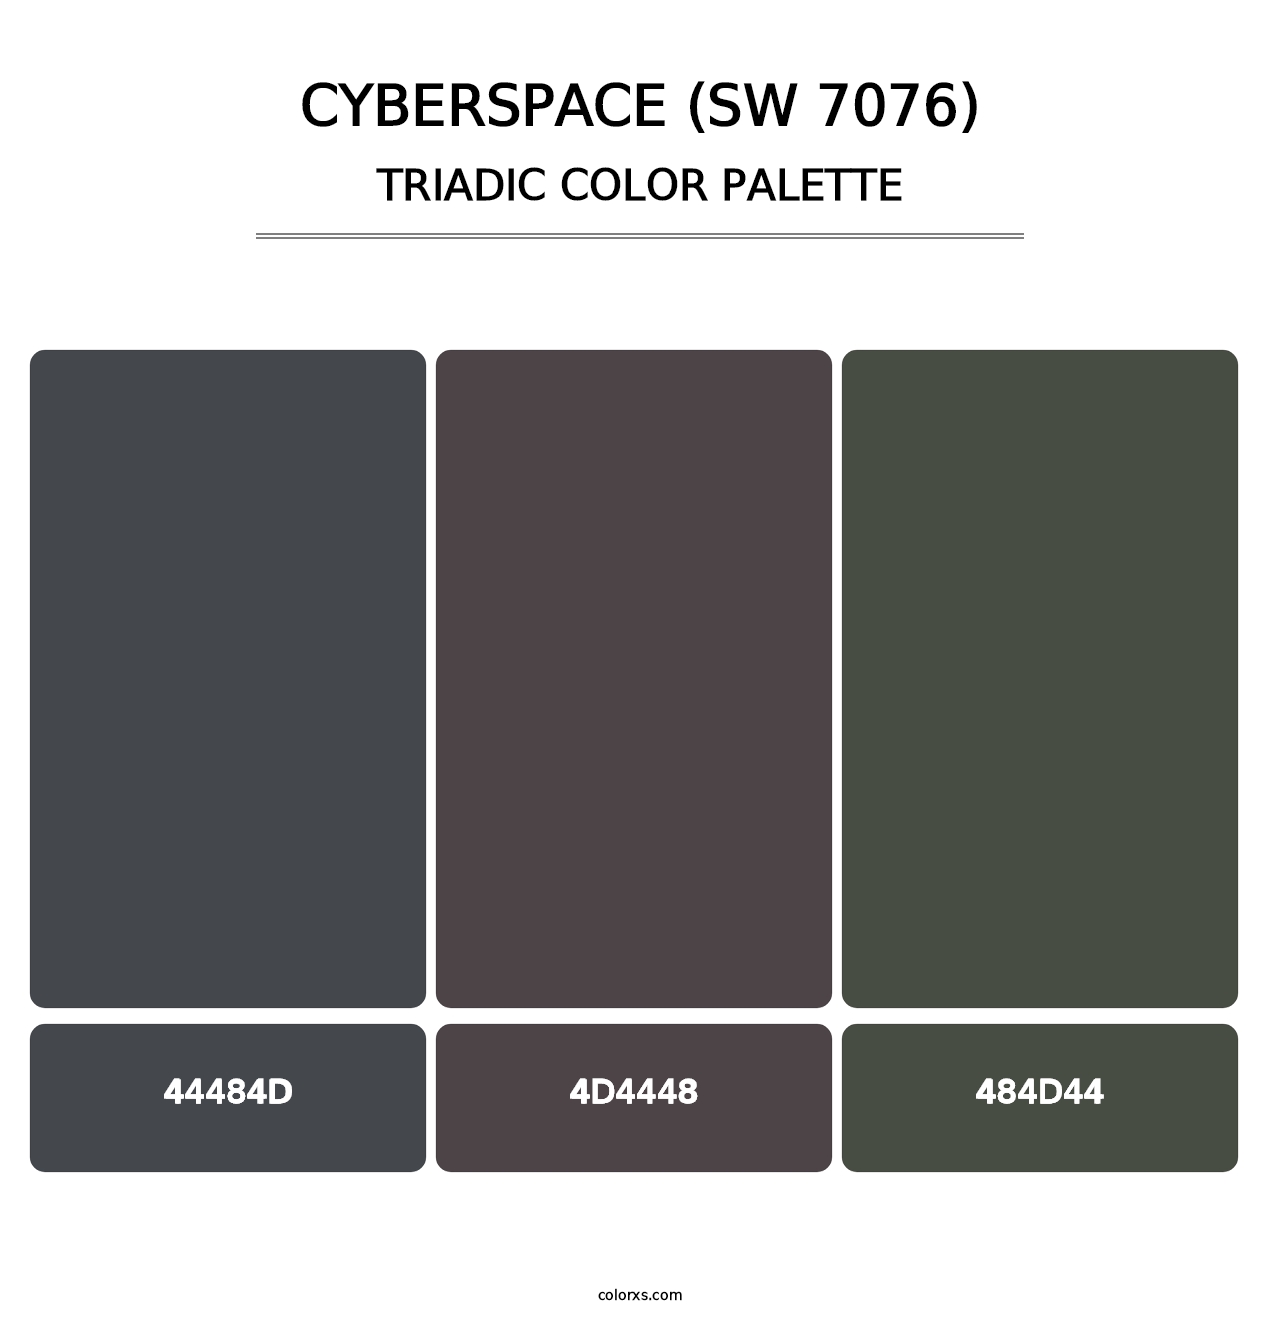 Cyberspace (SW 7076) - Triadic Color Palette